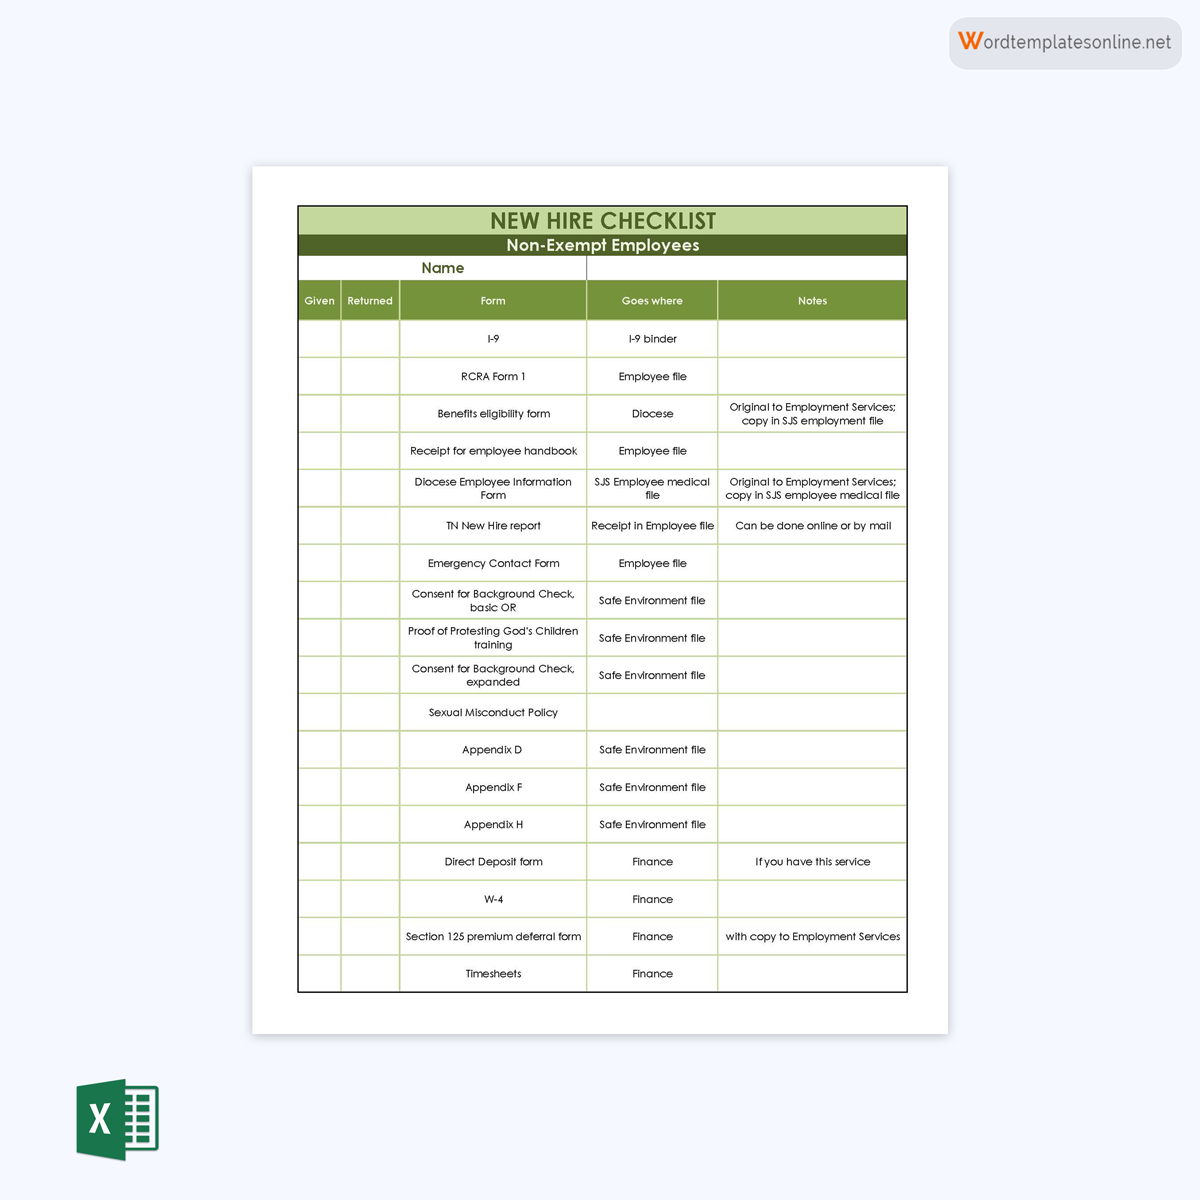 Free Downloadable Non-Exempt Employee New Hire Checklist Template for Excel Sheet